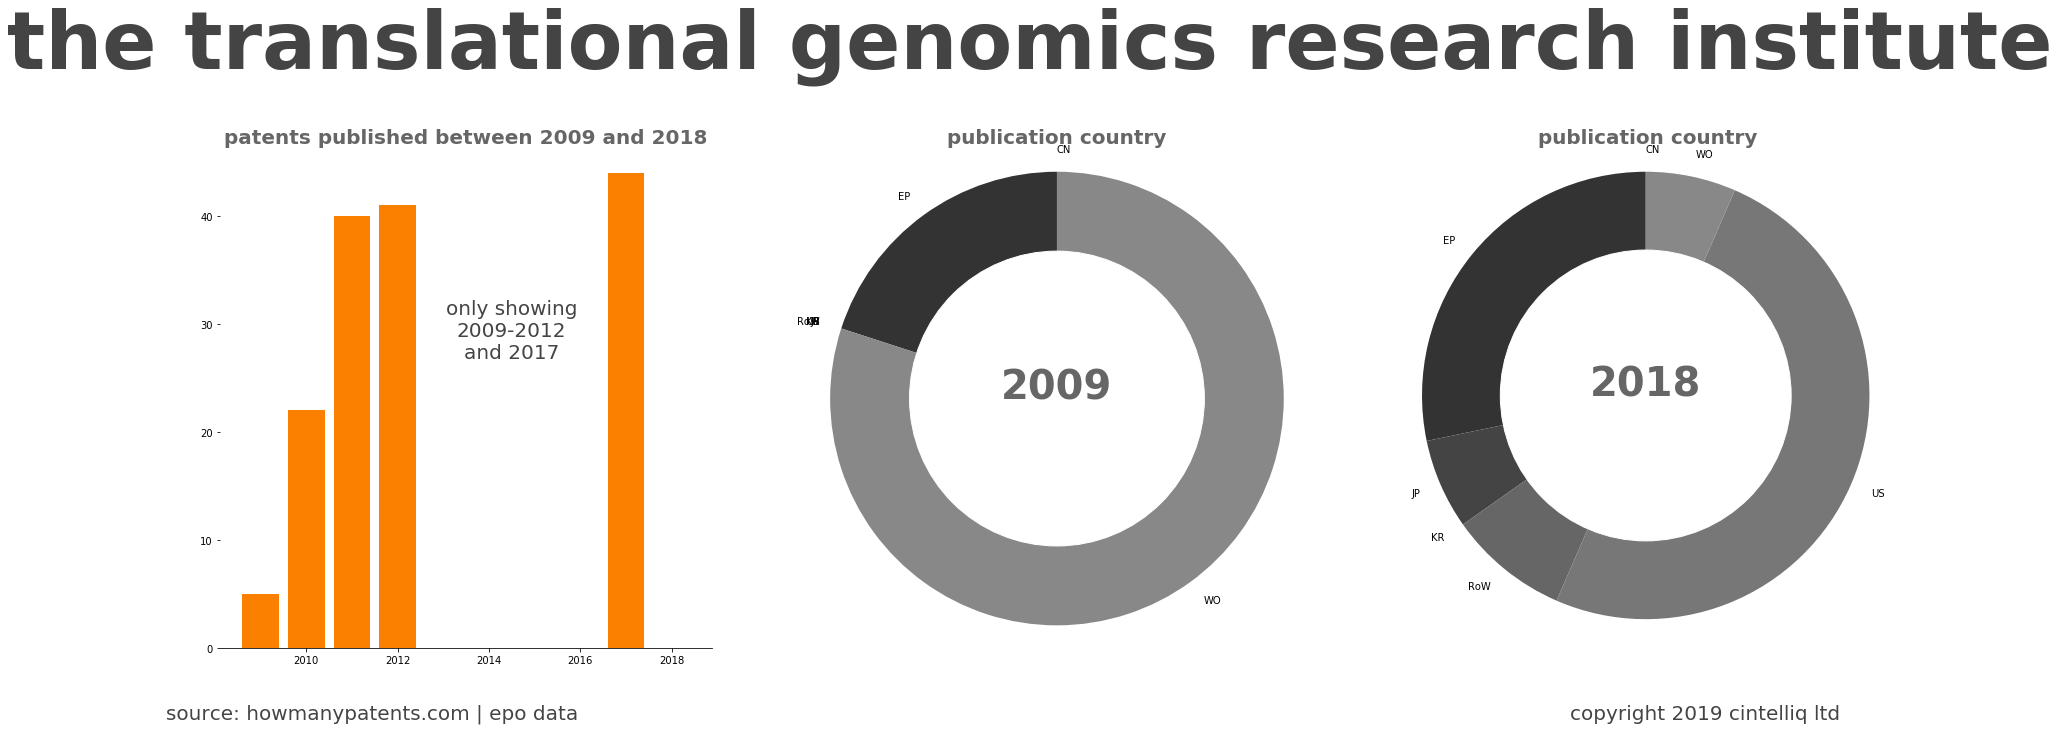 summary of patents for The Translational Genomics Research Institute